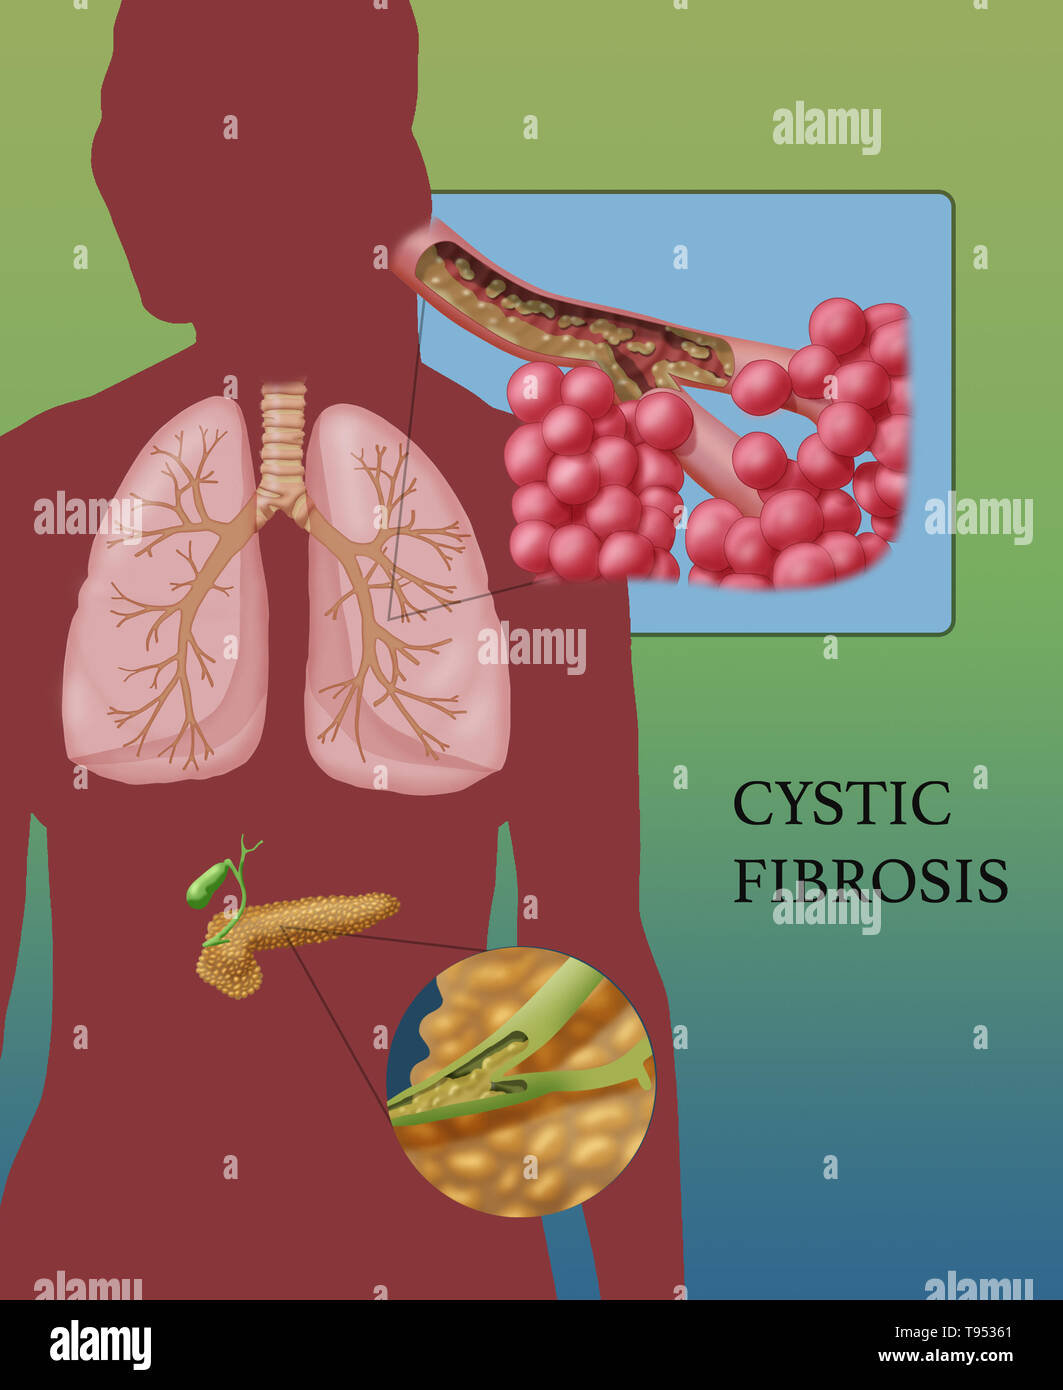 Cystic fibrosis (CF) is a genetic disorder that affects mostly the lungs, but also the pancreas, liver, kidneys, and intestine. Long-term issues include difficulty breathing and coughing up mucus as a result of frequent lung infections. Other signs and symptoms may include sinus infections, poor growth, fatty stool, clubbing of the fingers and toes, and infertility in some males. Different people may have different degrees of symptoms. Stock Photo